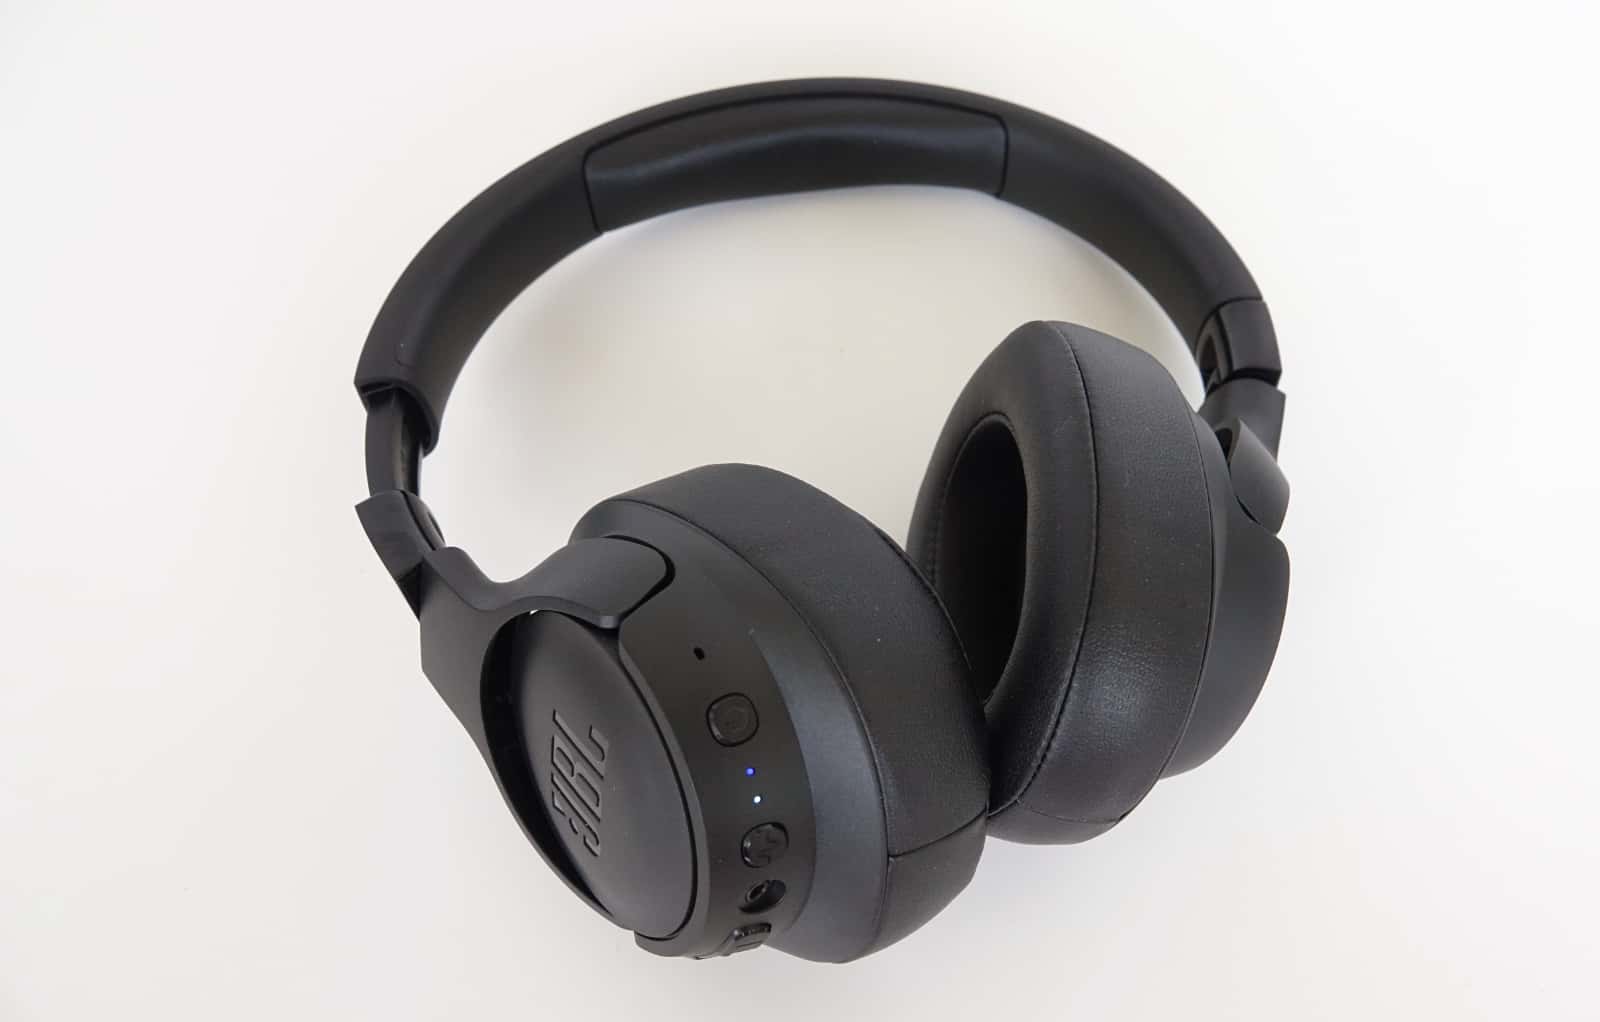 Wireless Headphones Review: JBL Tune 760NC, by Author